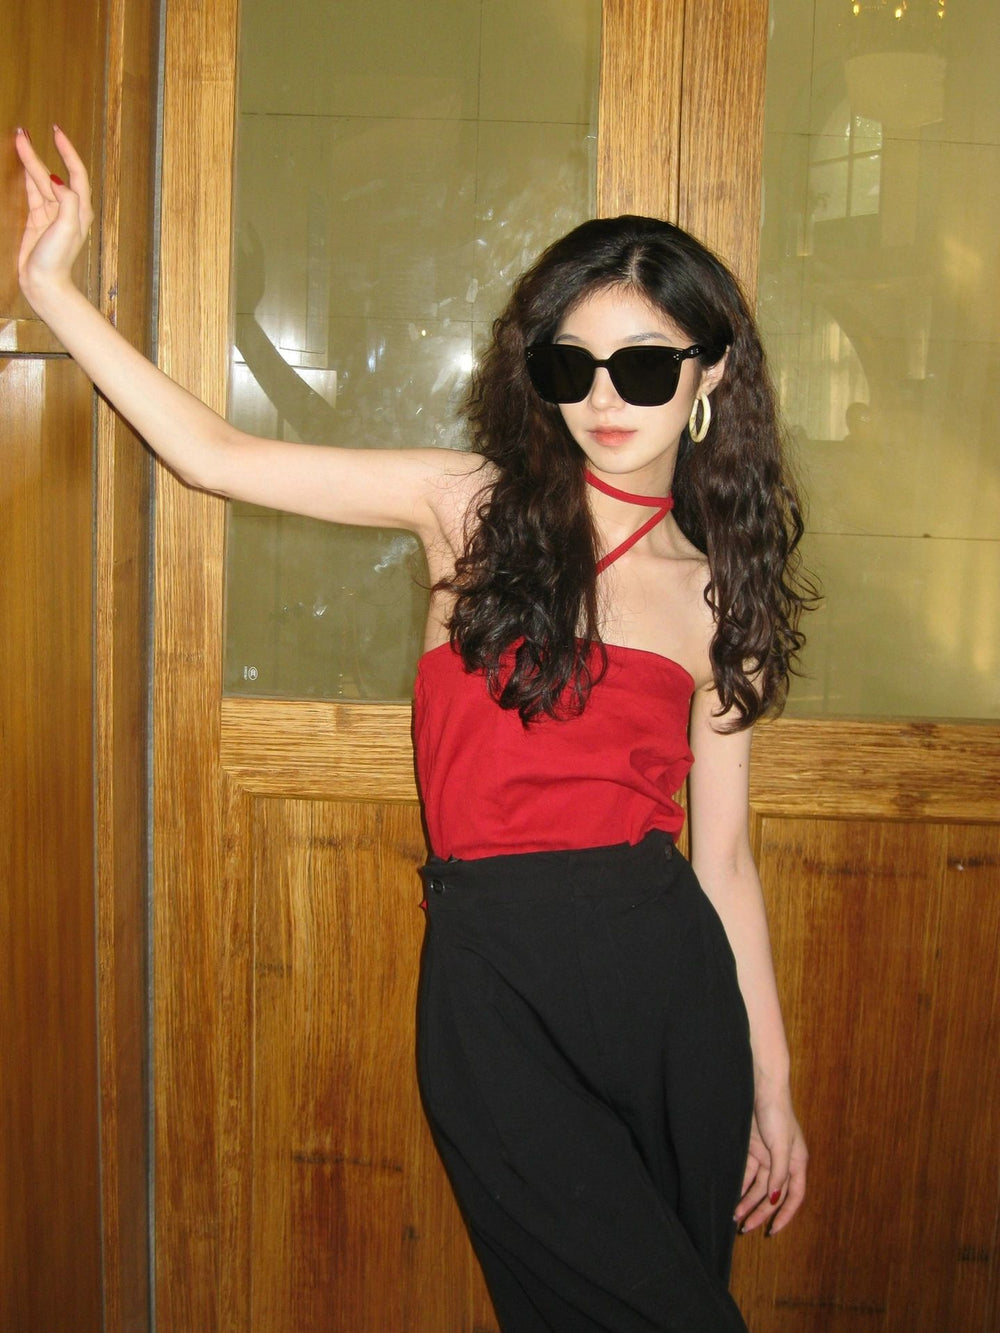 A captivating lady adorned in a striking red top and a fashionable black skirt, radiating confidence and allure wearing her Korean fashionable sunglasses.